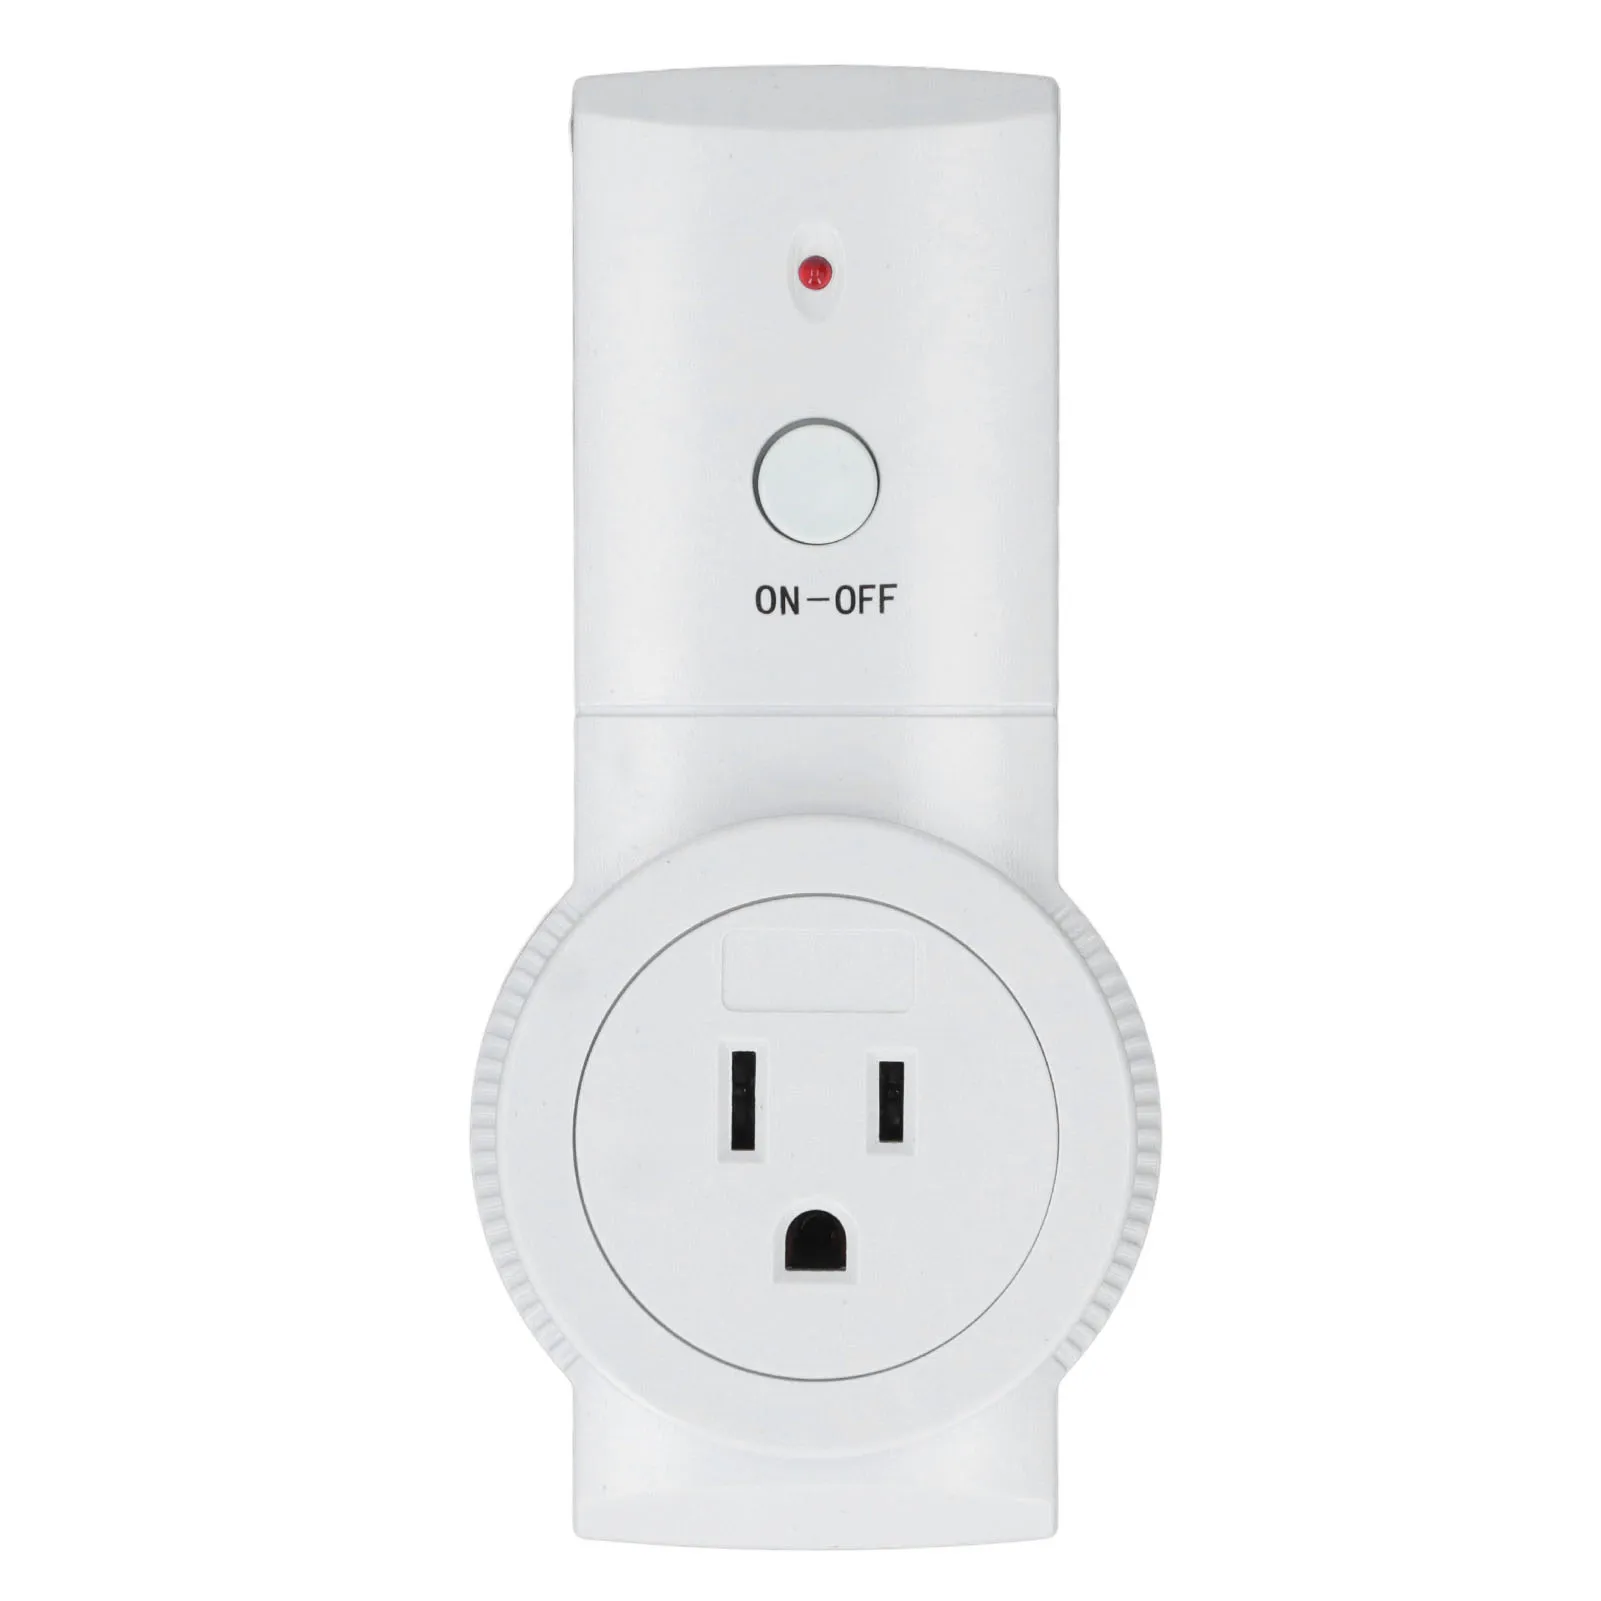 https://ae01.alicdn.com/kf/Sd71b574da2c747f4ac32ed6069a62437p/Remote-Control-Electric-Outlet-Switch-Energy-Saving-ABS-Housing-Smart-Wireless-Power-Outlet-Socket-US-Plug.jpg